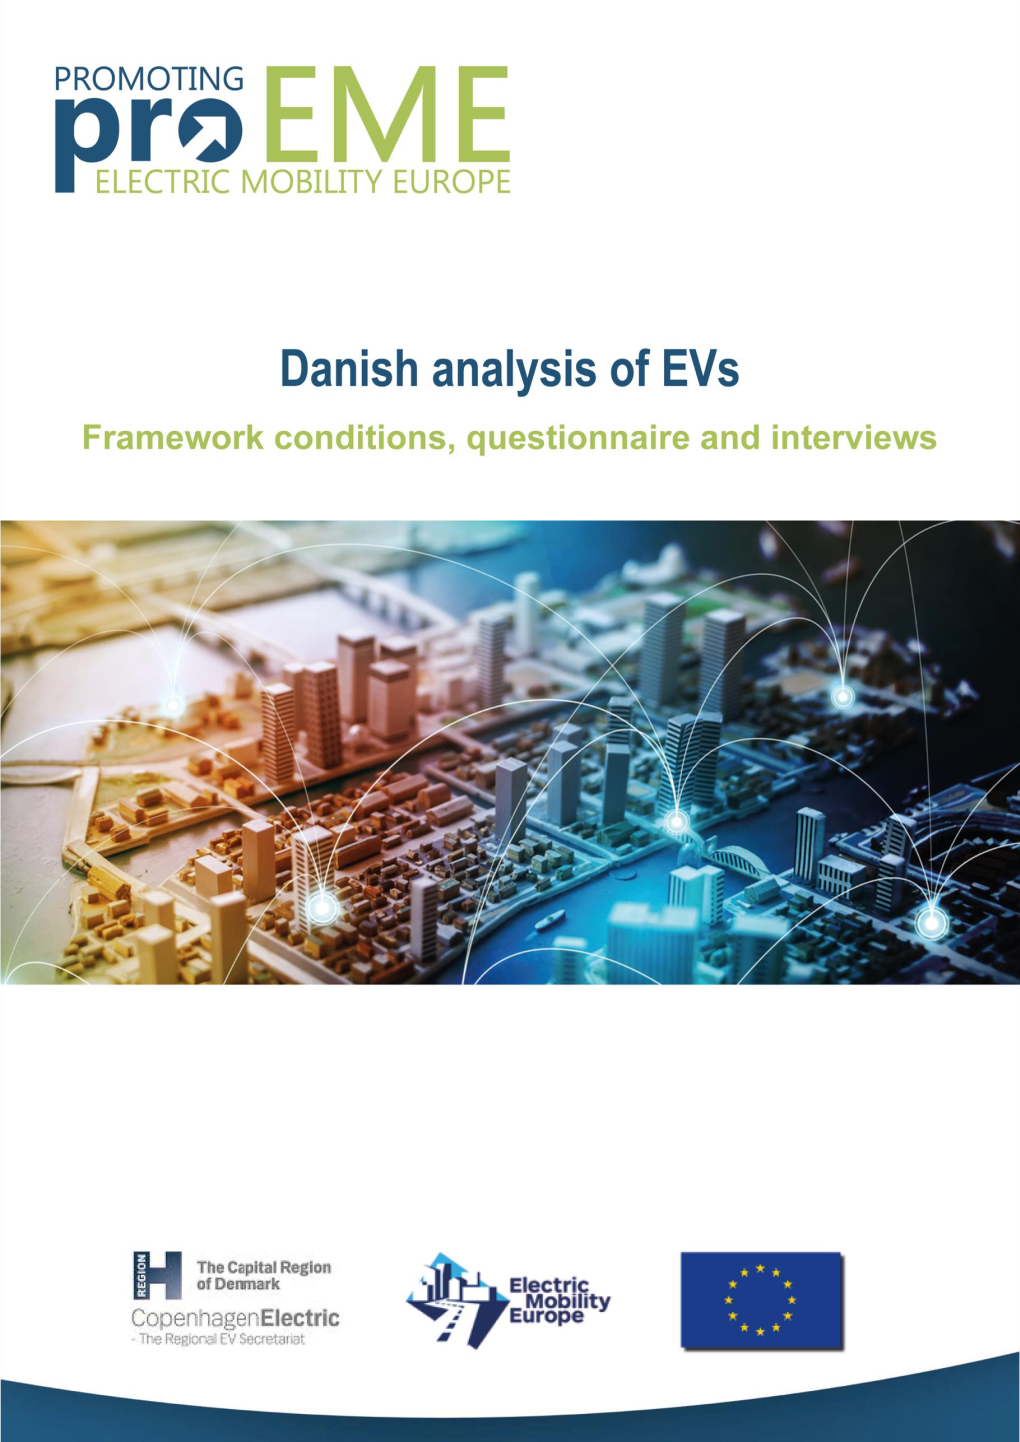 Proeme Framework Conditions, Danish EV Perceptions and Experienced Users Interviews and Analysis 0 Copenhagen Electric Frems